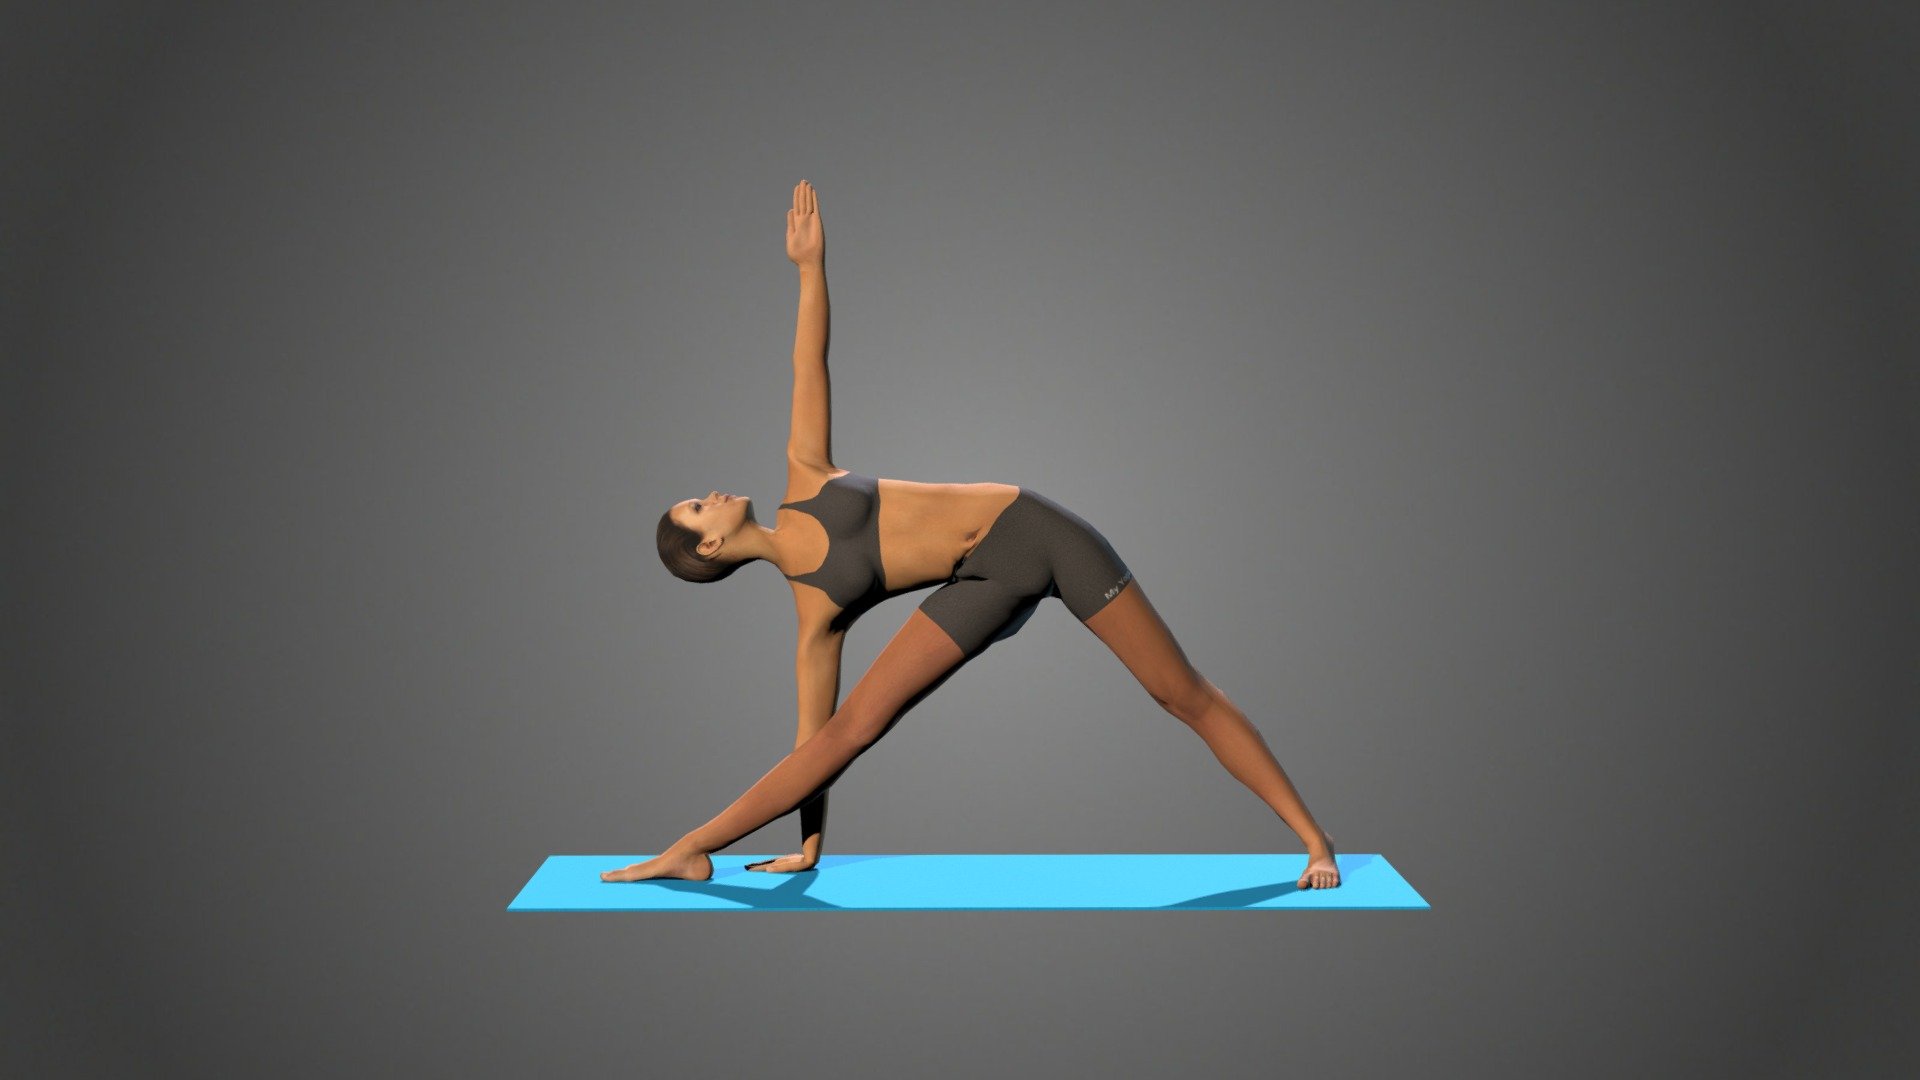 Largest Library of 3D Yoga Poses  Find inspiration with Lily Yoga